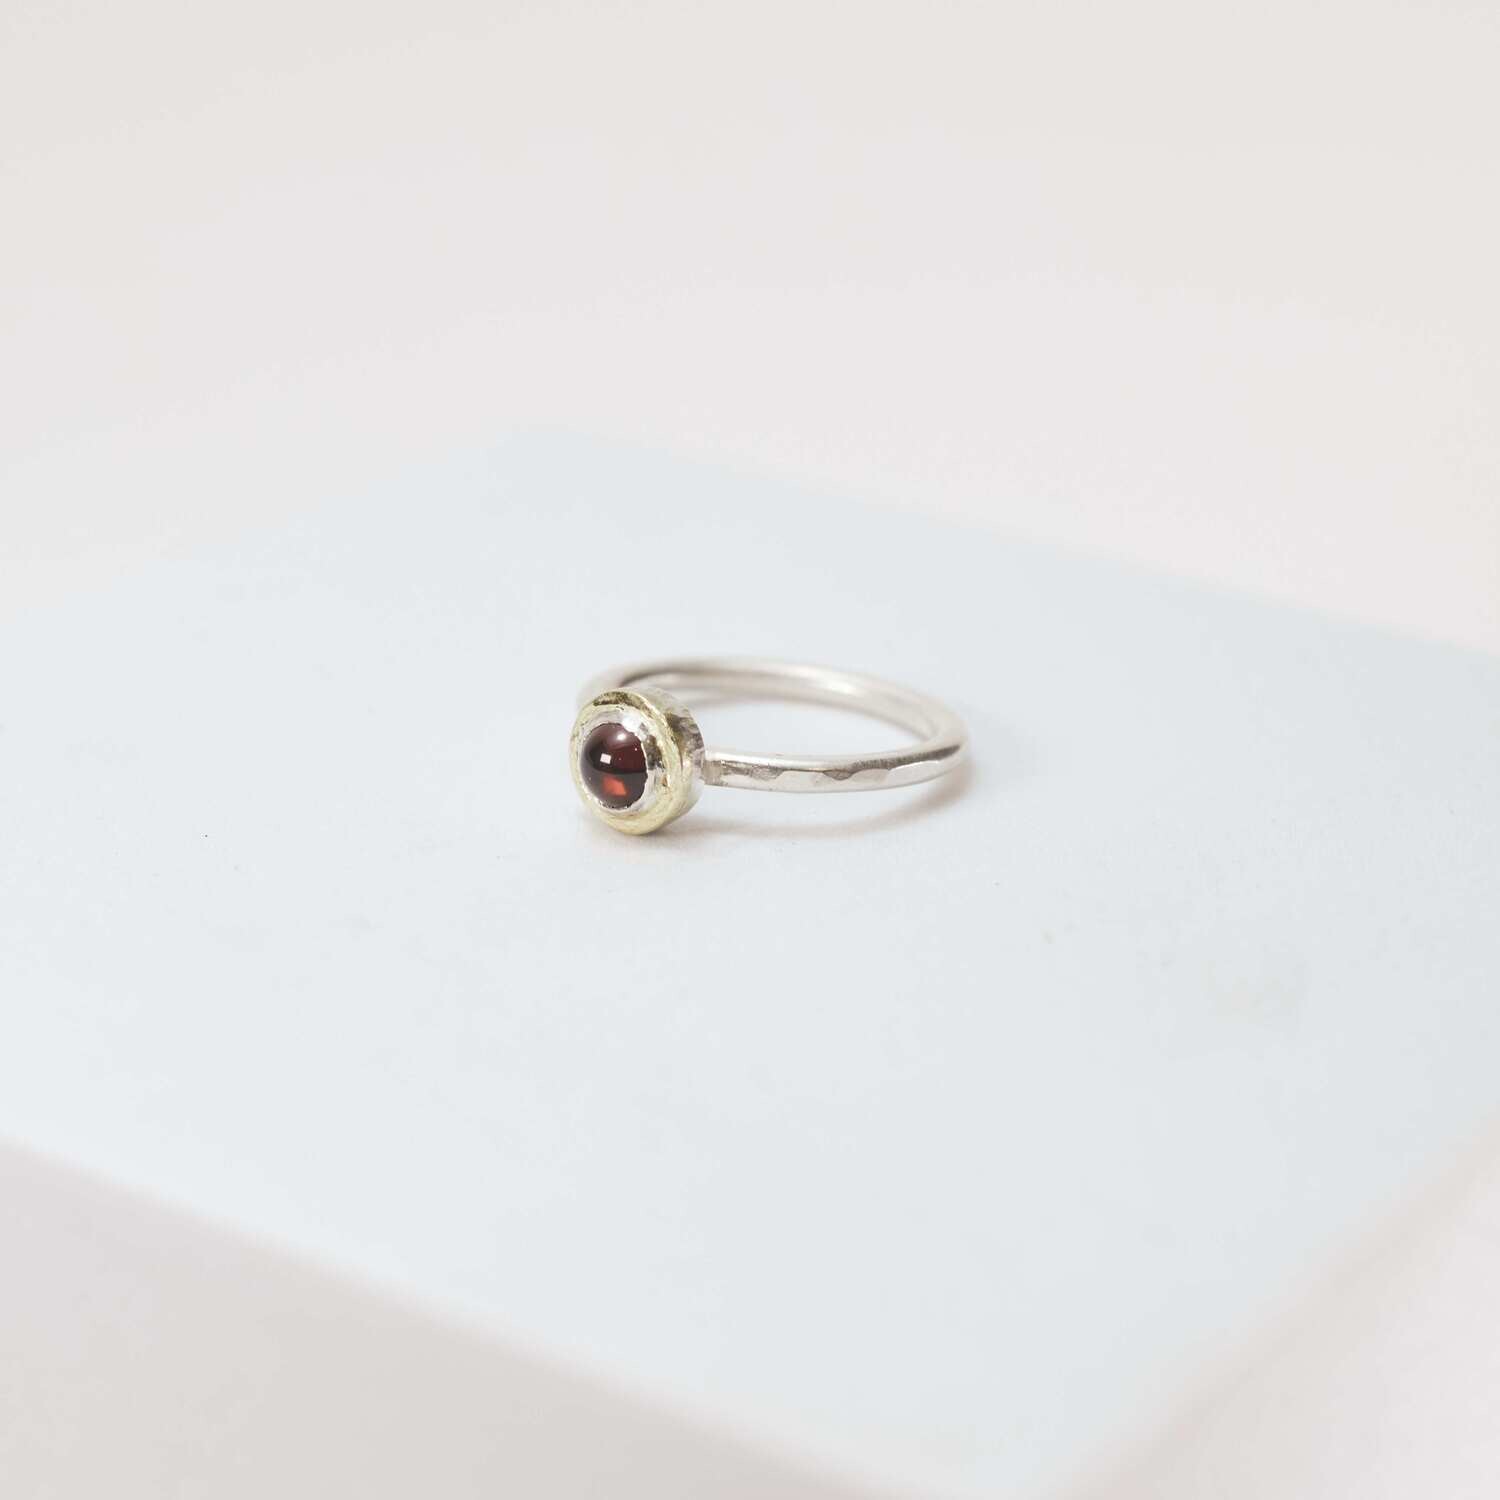 Garnet Ring, Sterling Silver With 18K Gold Setting